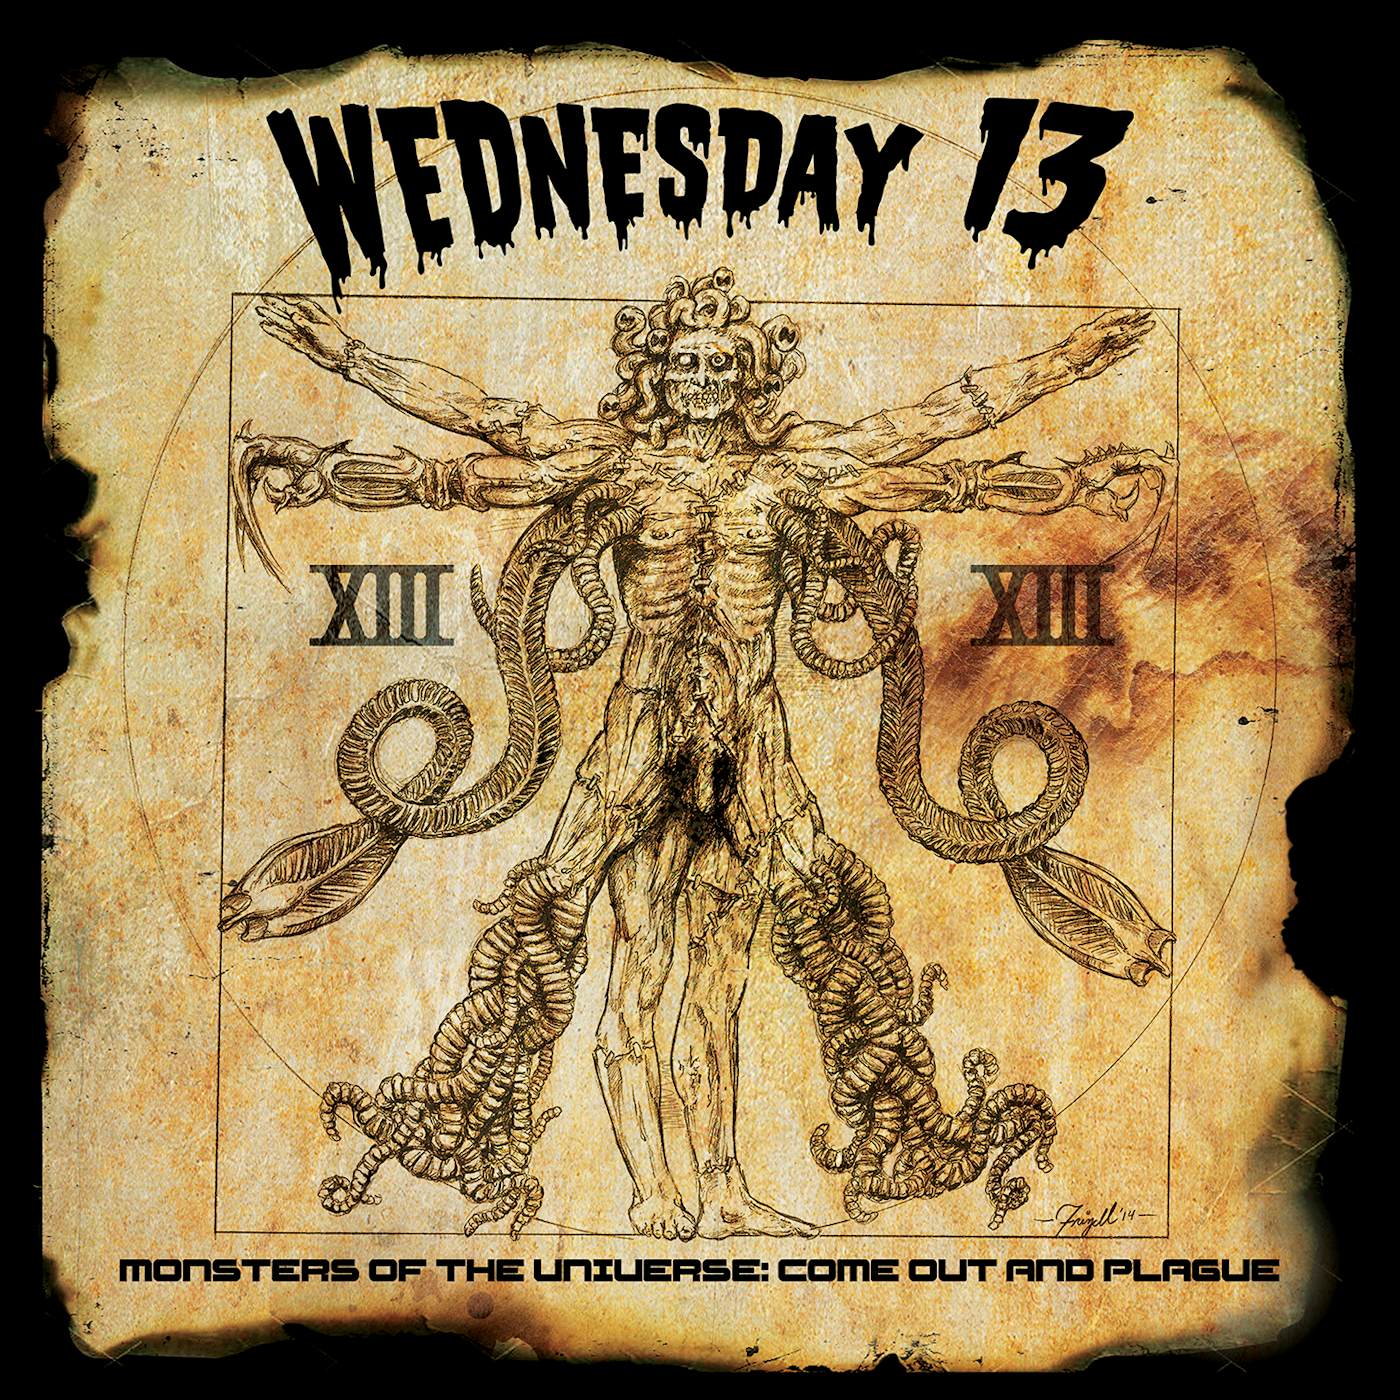 Wednesday 13 MONSTERS OF THE UNIVERSE: COME CD